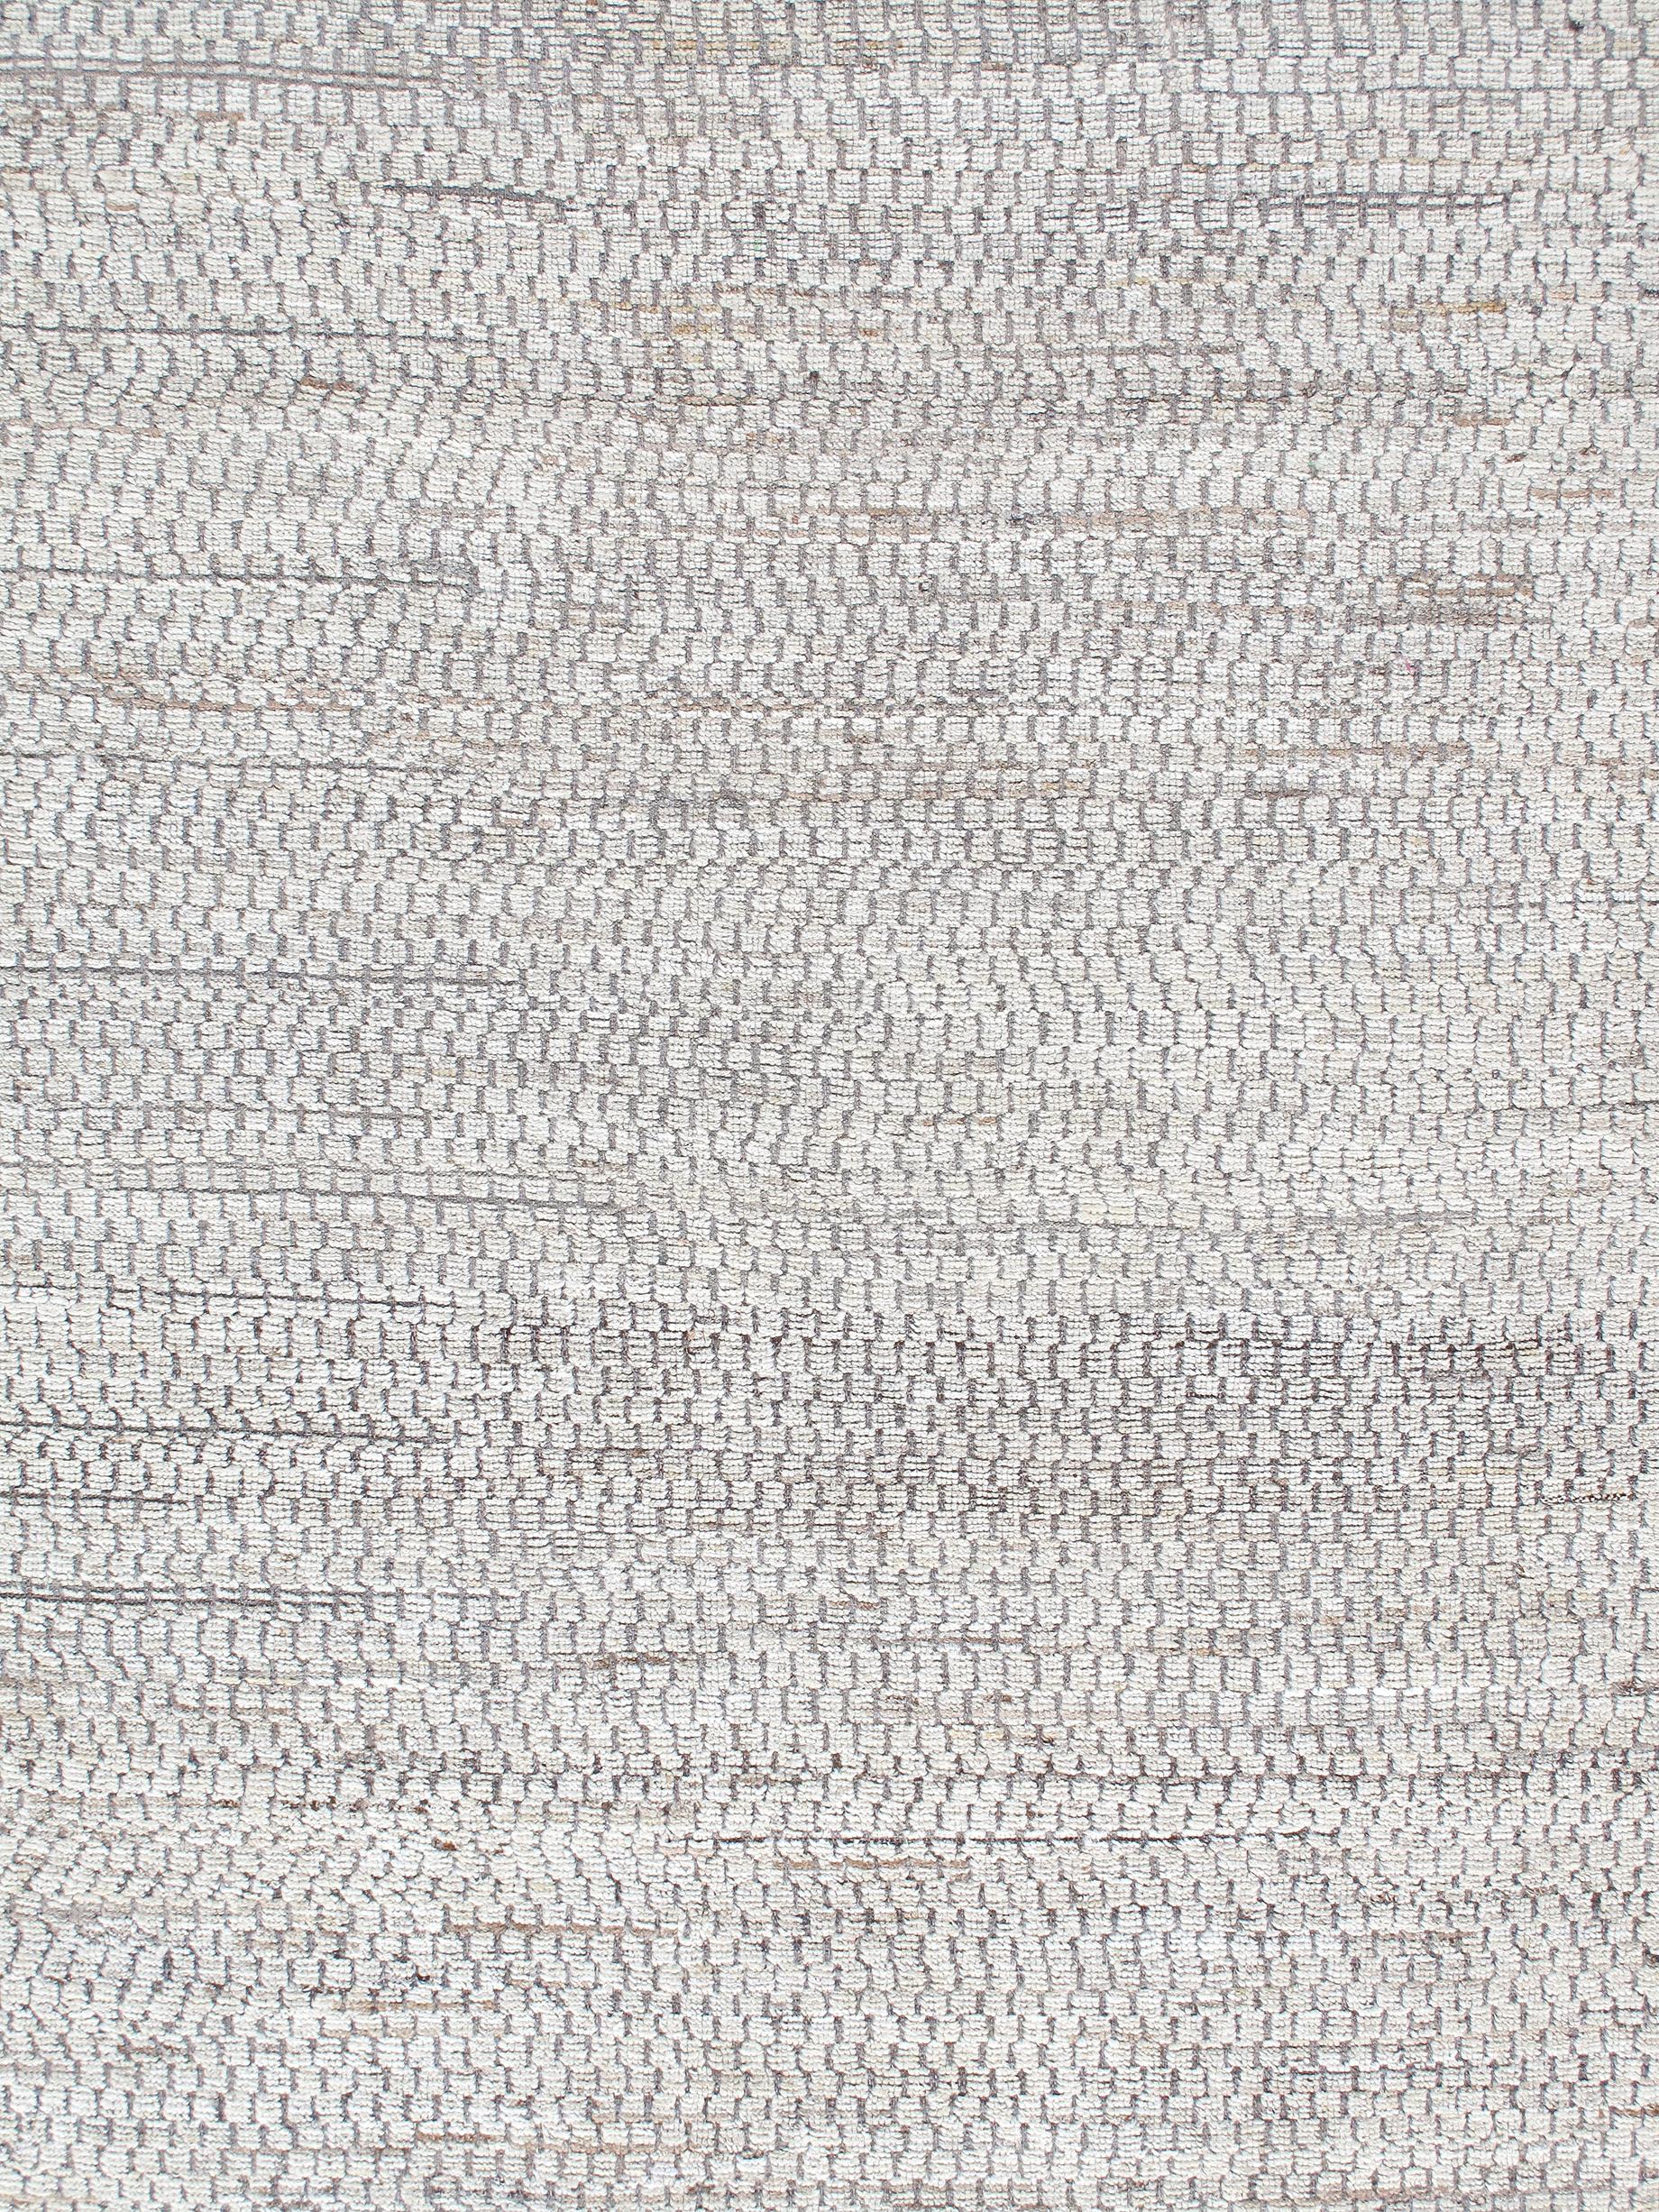 Our Relief rug is hand-knotted, and made from the finest hand-carded, hand-spun undyed wool of grey and beige tones. Many of the rugs made in the villages surrounding the city of Shiraz, are crafted by local tribal weavers, which produce many sought